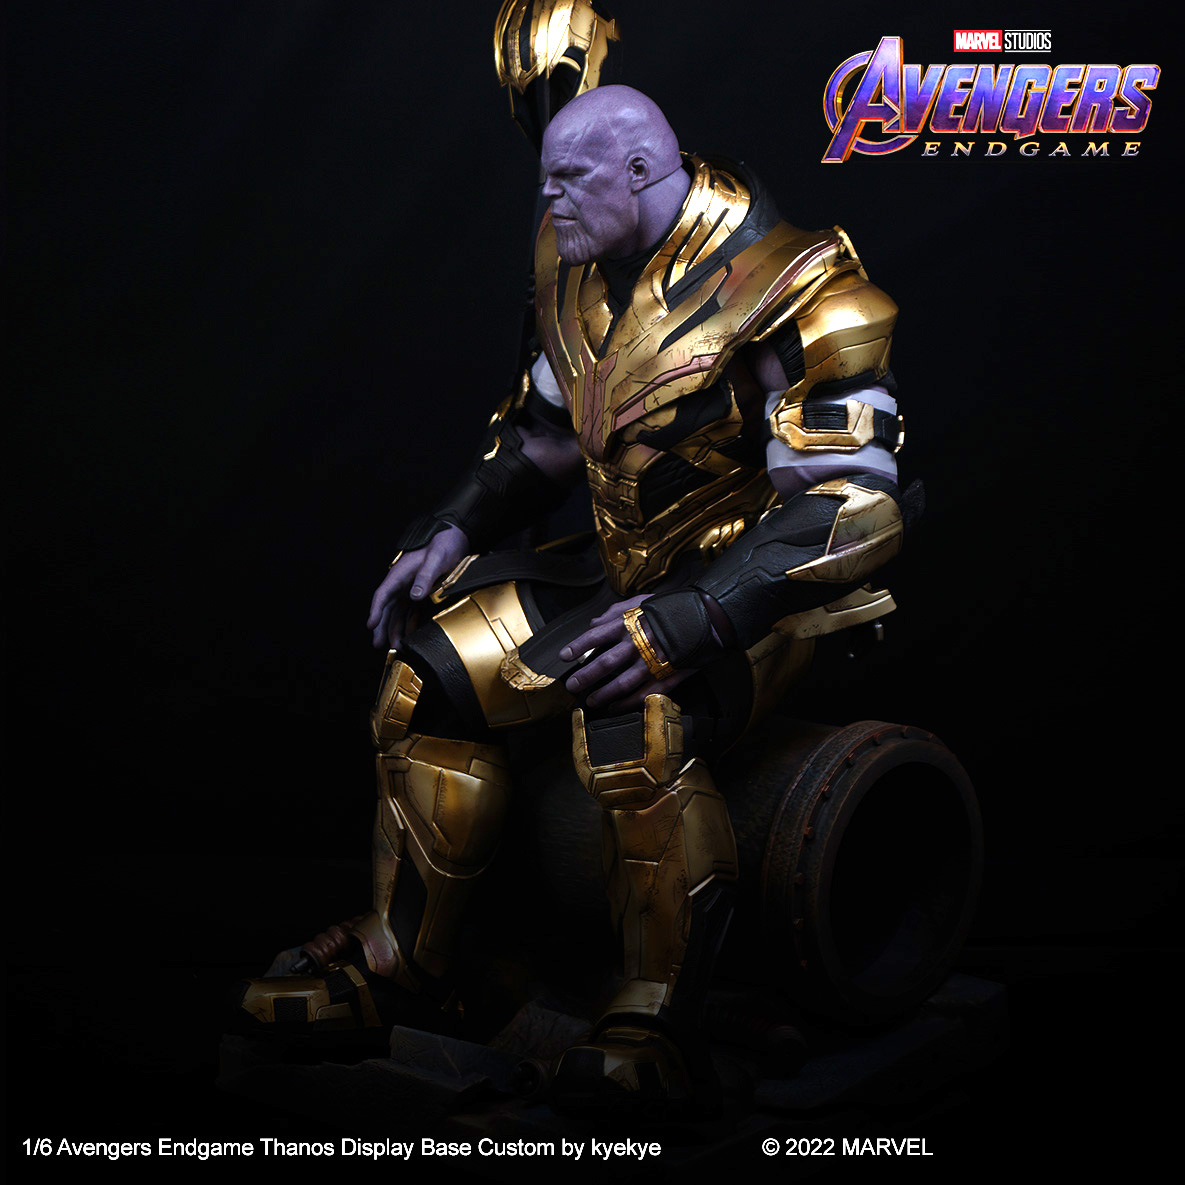 [Diorama Display Base] for 1/6 Scale Hot Toys Endgame Thanos action Figure or equivalent